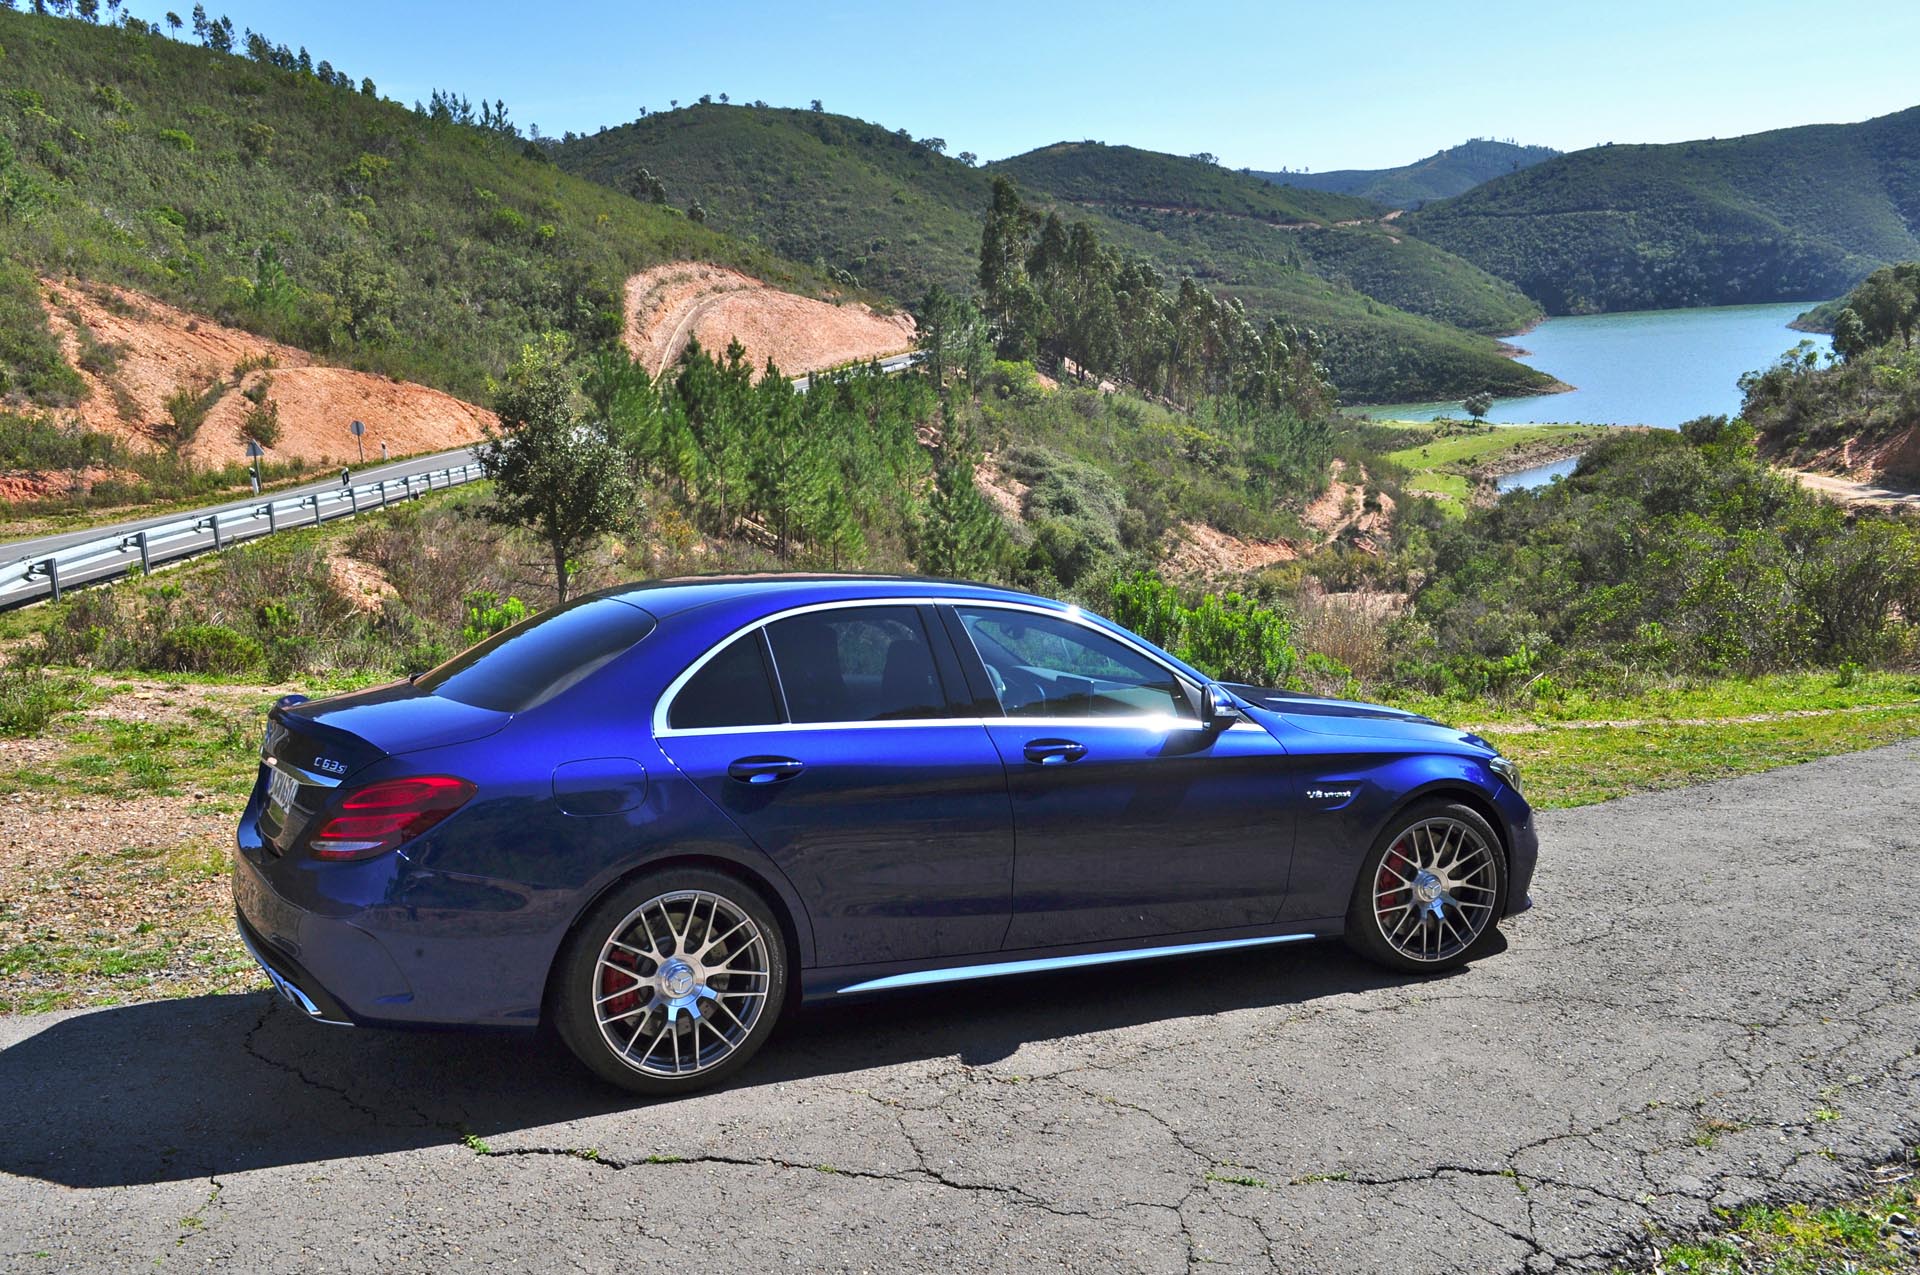 After spending a day driving the C 63 S on both twisty roads of southern Portugal and the Portimao race track, here’s how it stacks up from behind the wheel.